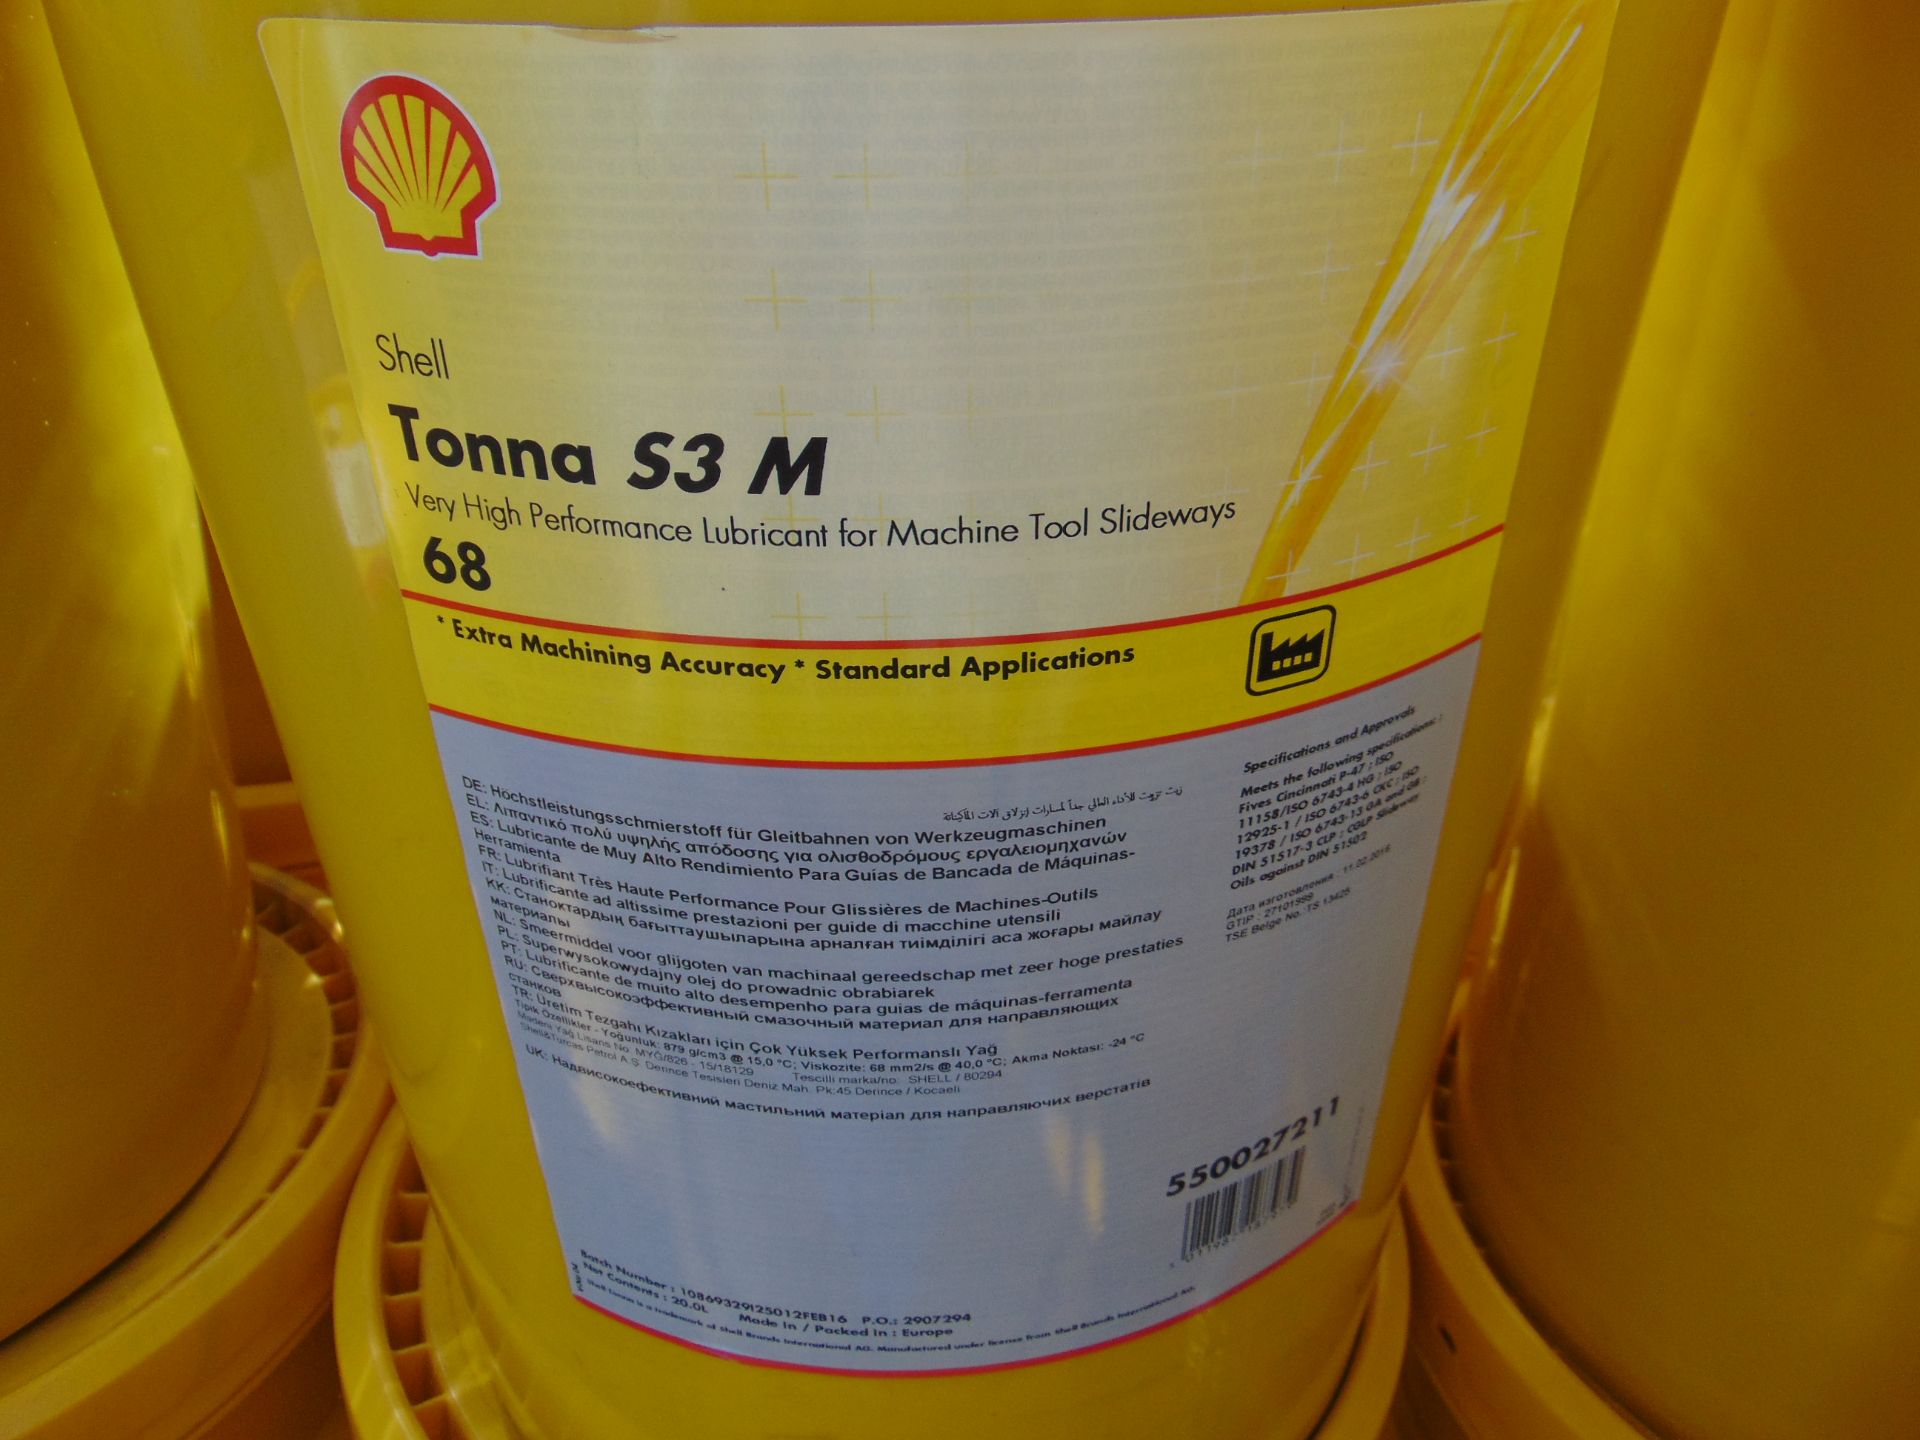 18x Unissued 20L Drums of Shell Tonna S3M 68 Lubricant for Machine Tool Slides etc - Image 2 of 2